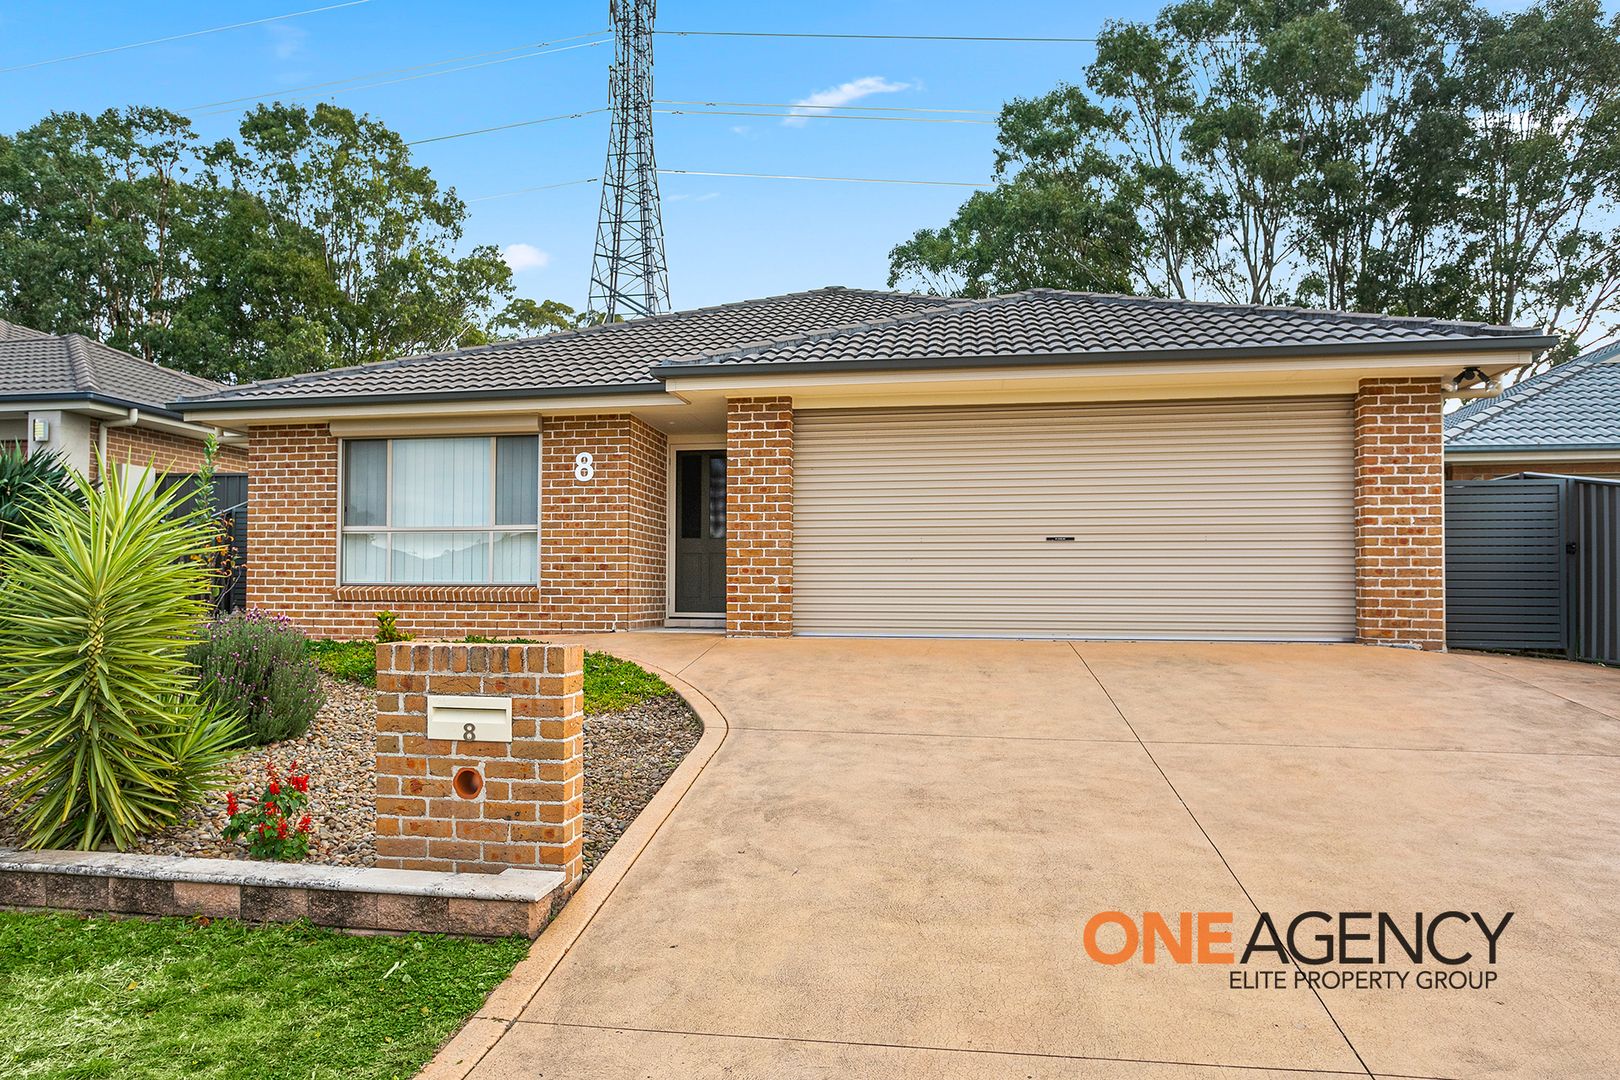 3 bedrooms House in 8 Spears Place HORSLEY NSW, 2530